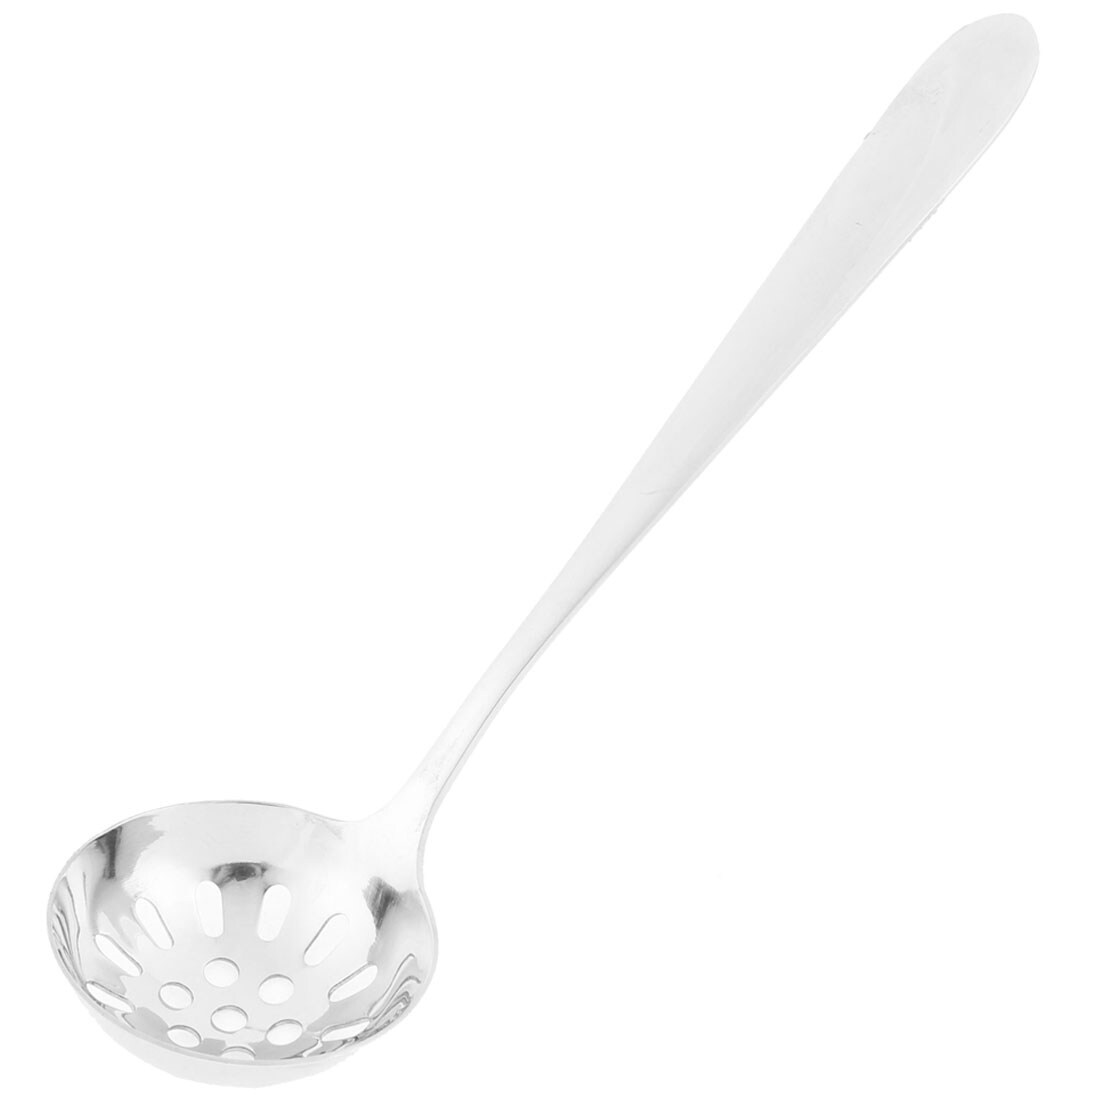 https://ak1.ostkcdn.com/images/products/is/images/direct/428bb751ee2b38934ab206bb9324a32652ea0a35/Home-Kitchen-Stainless-Steel-Soup-Perforated-Straining-Ladle-6cm-Dia.jpg